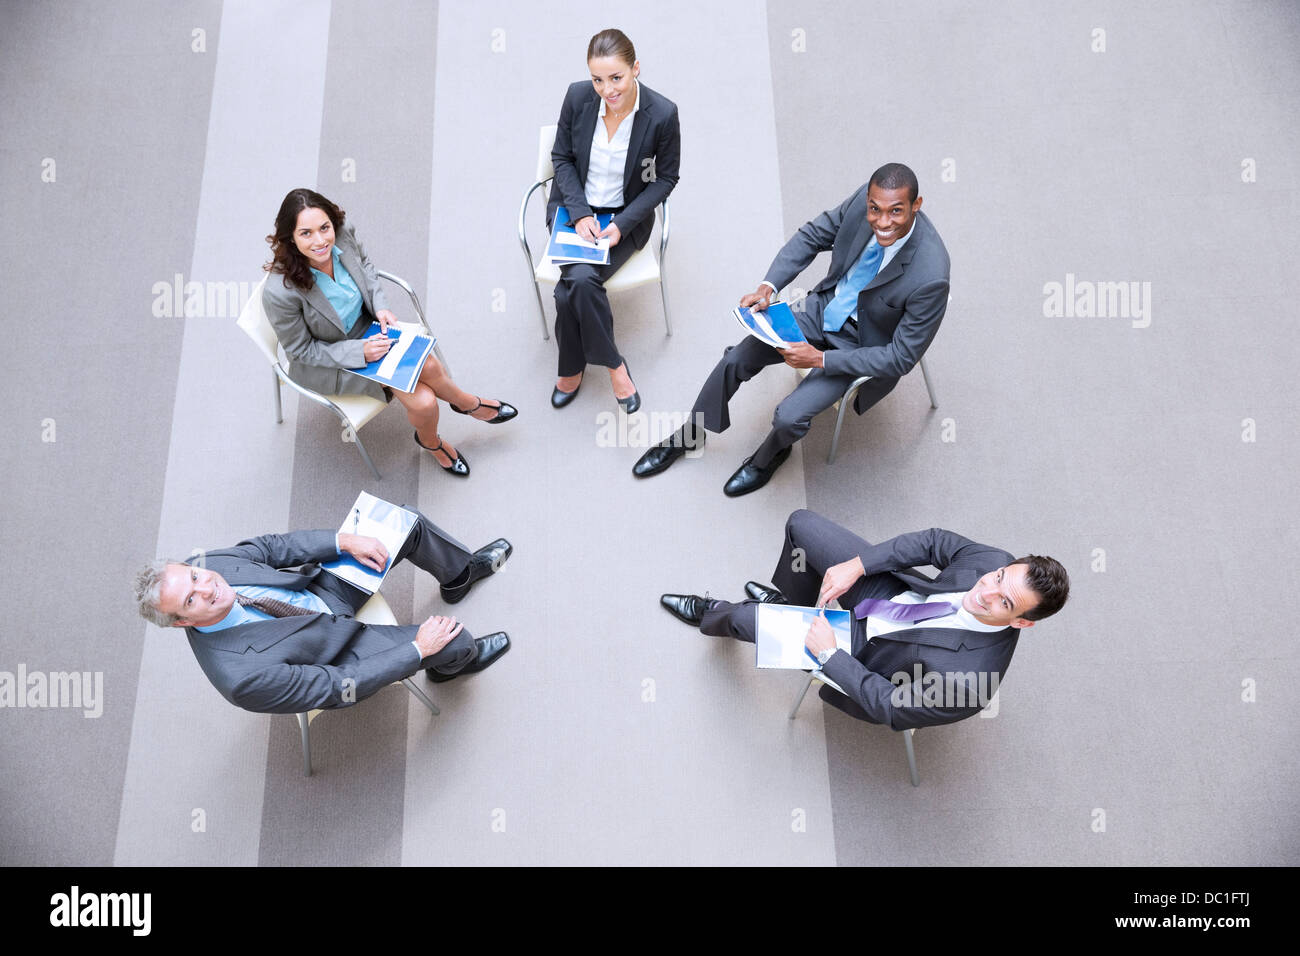 High angle portrait of smiling business people meeting in circle Stock Photo